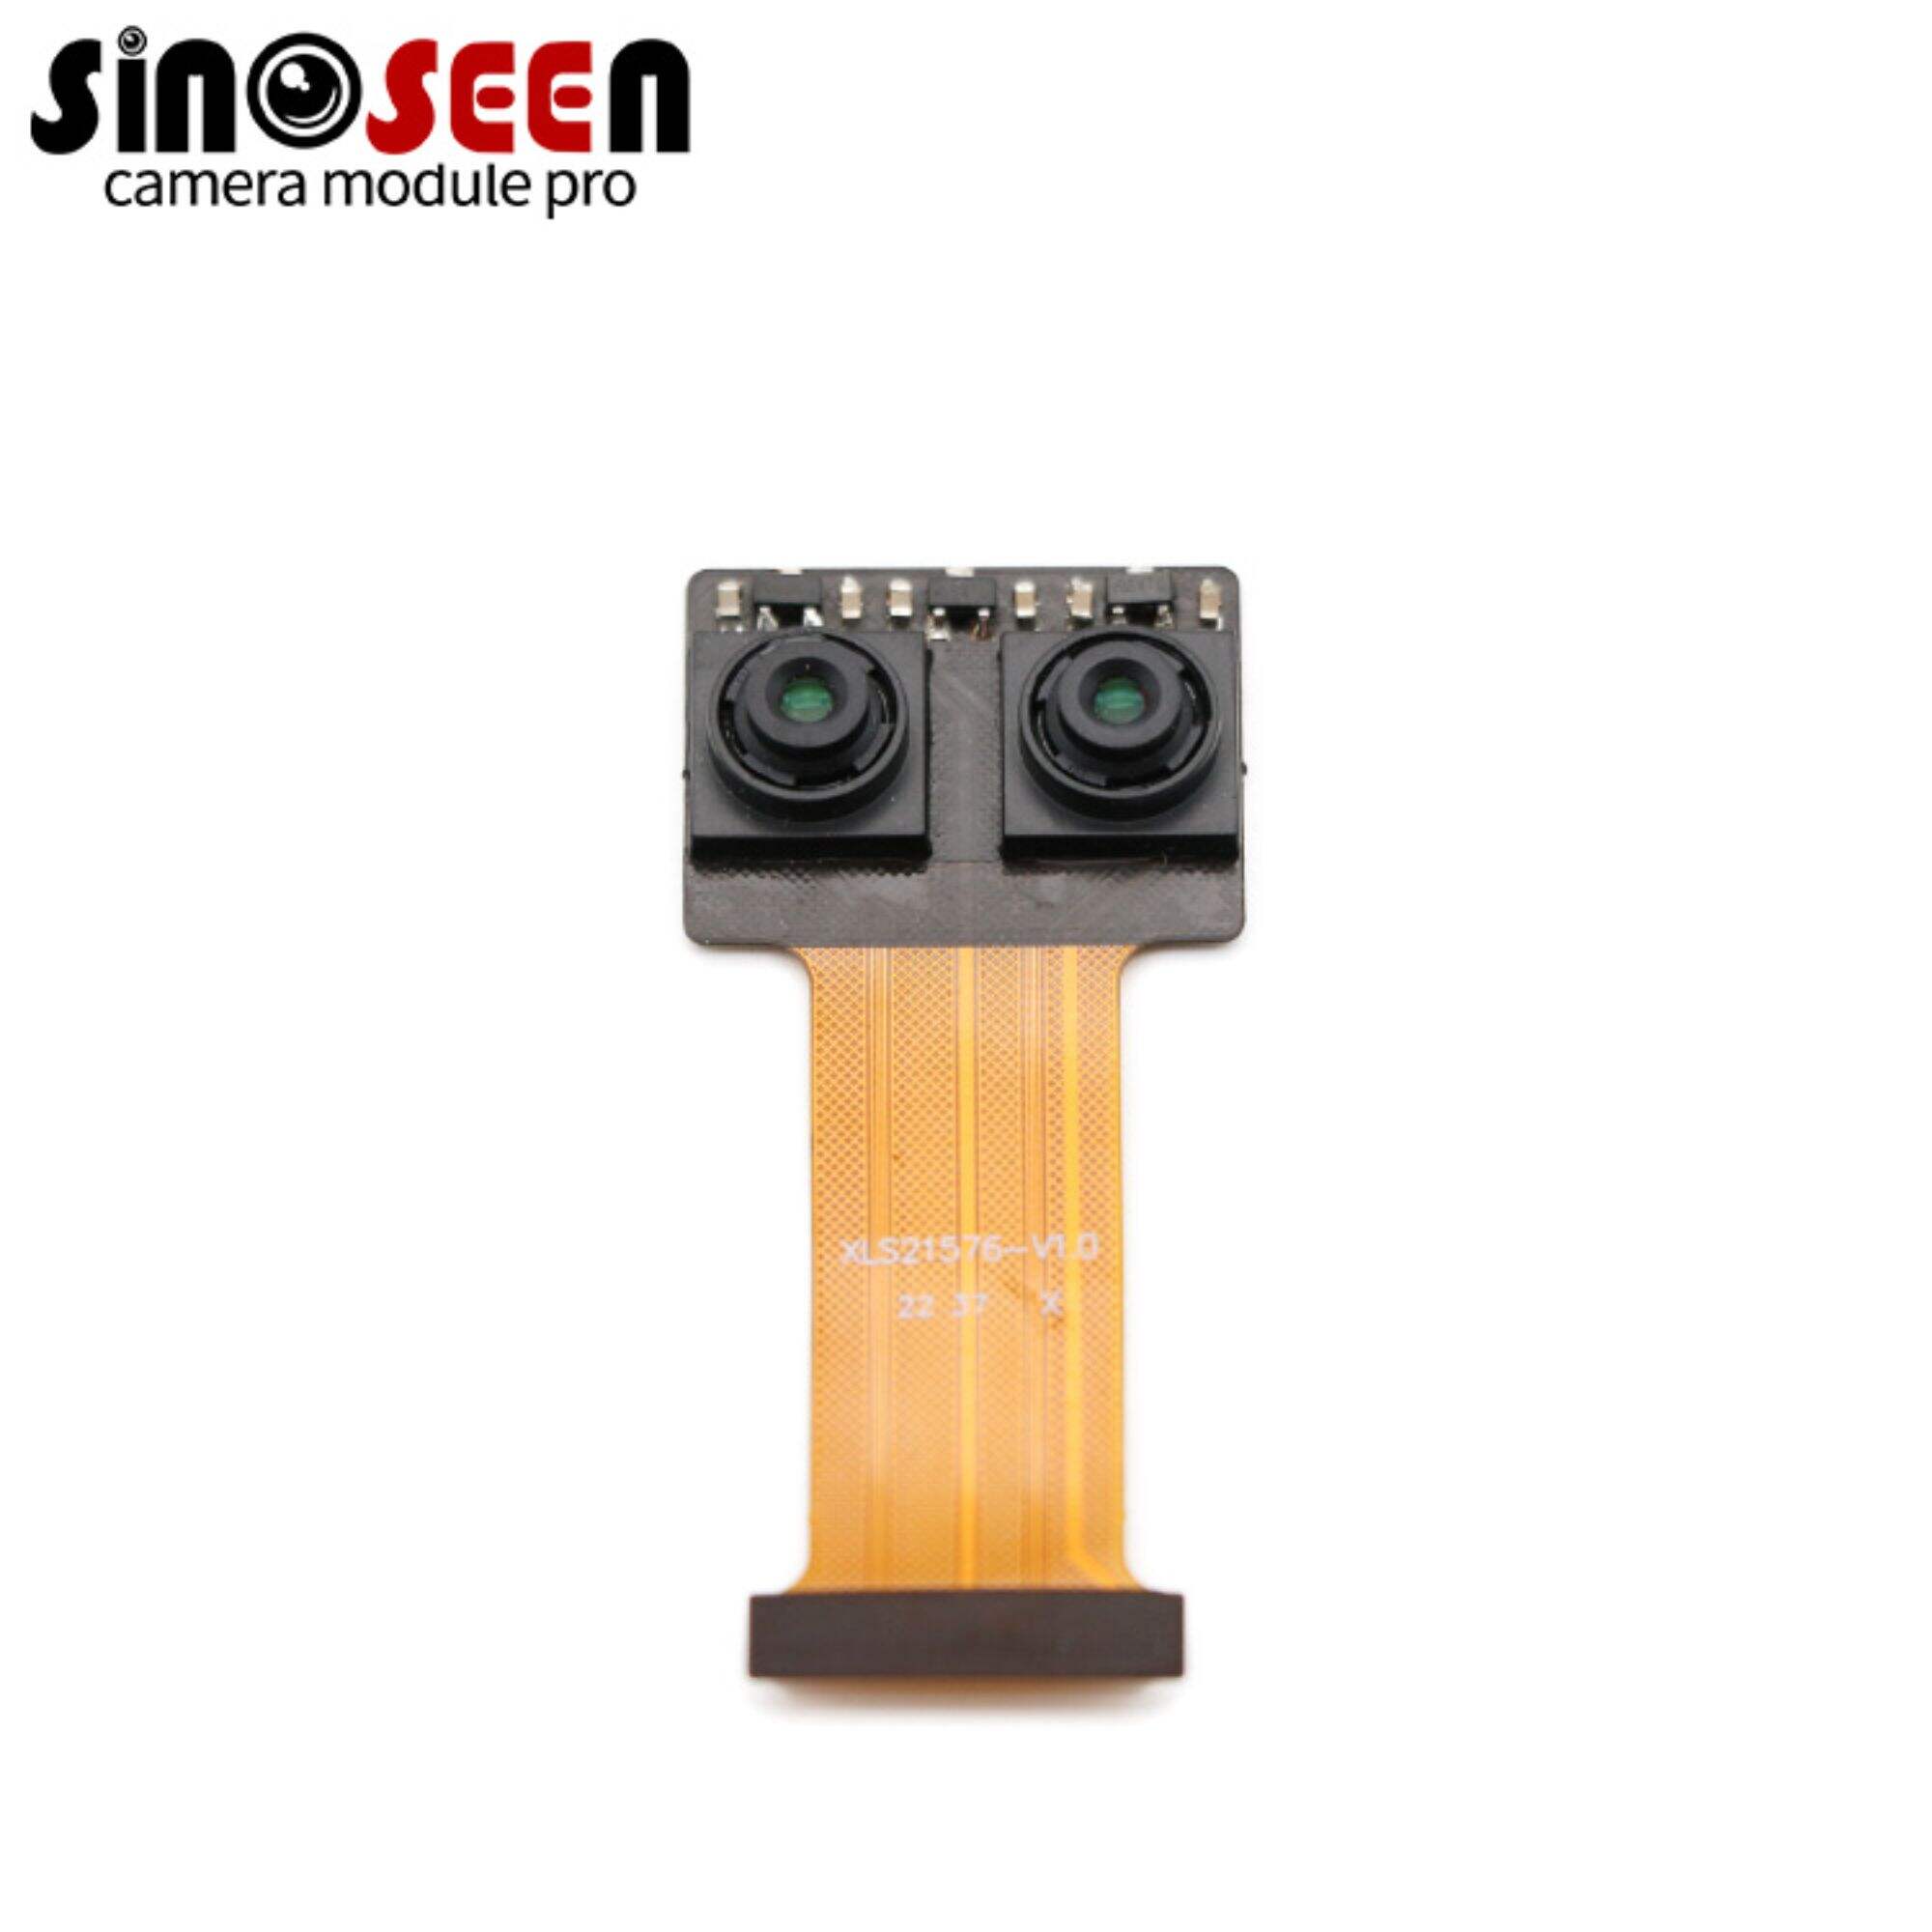 Dual Lens SC2310 Sensor Camera Module With RGB Filters For Accurate Color Reproduction